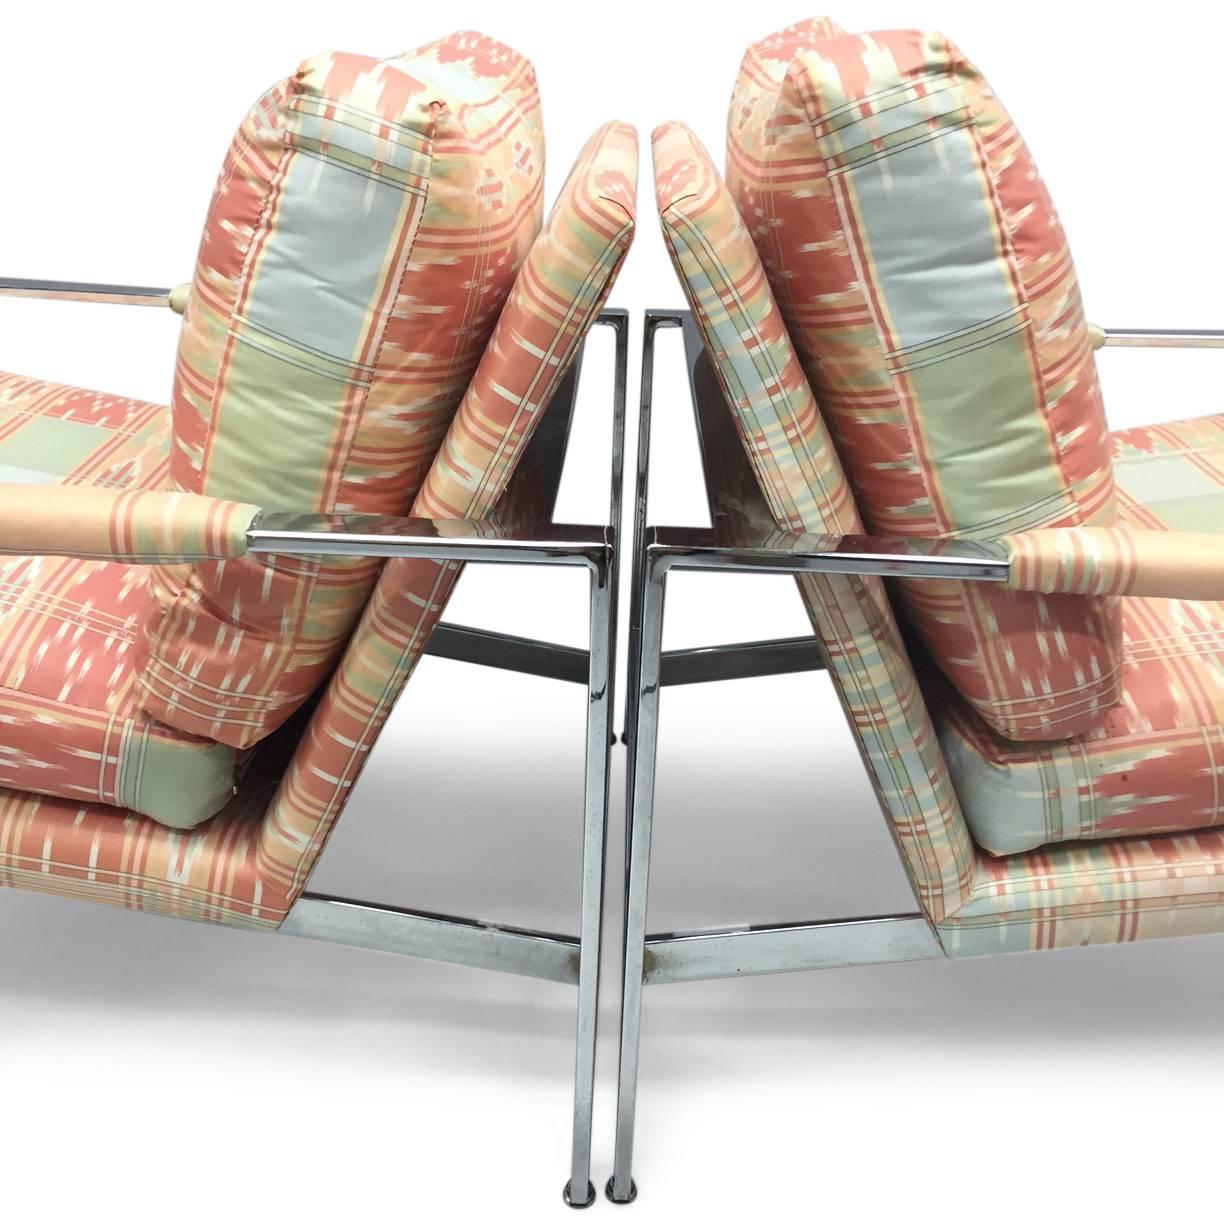 Hello Mid-Century Enthusiasts!

Up for sale is a pair of Milo Baughman for Thayer Coggin flat bar chrome lounge chairs.

This is a nice pair, but should probably be reupholstered given that they were subjected to an interesting reupholstery job